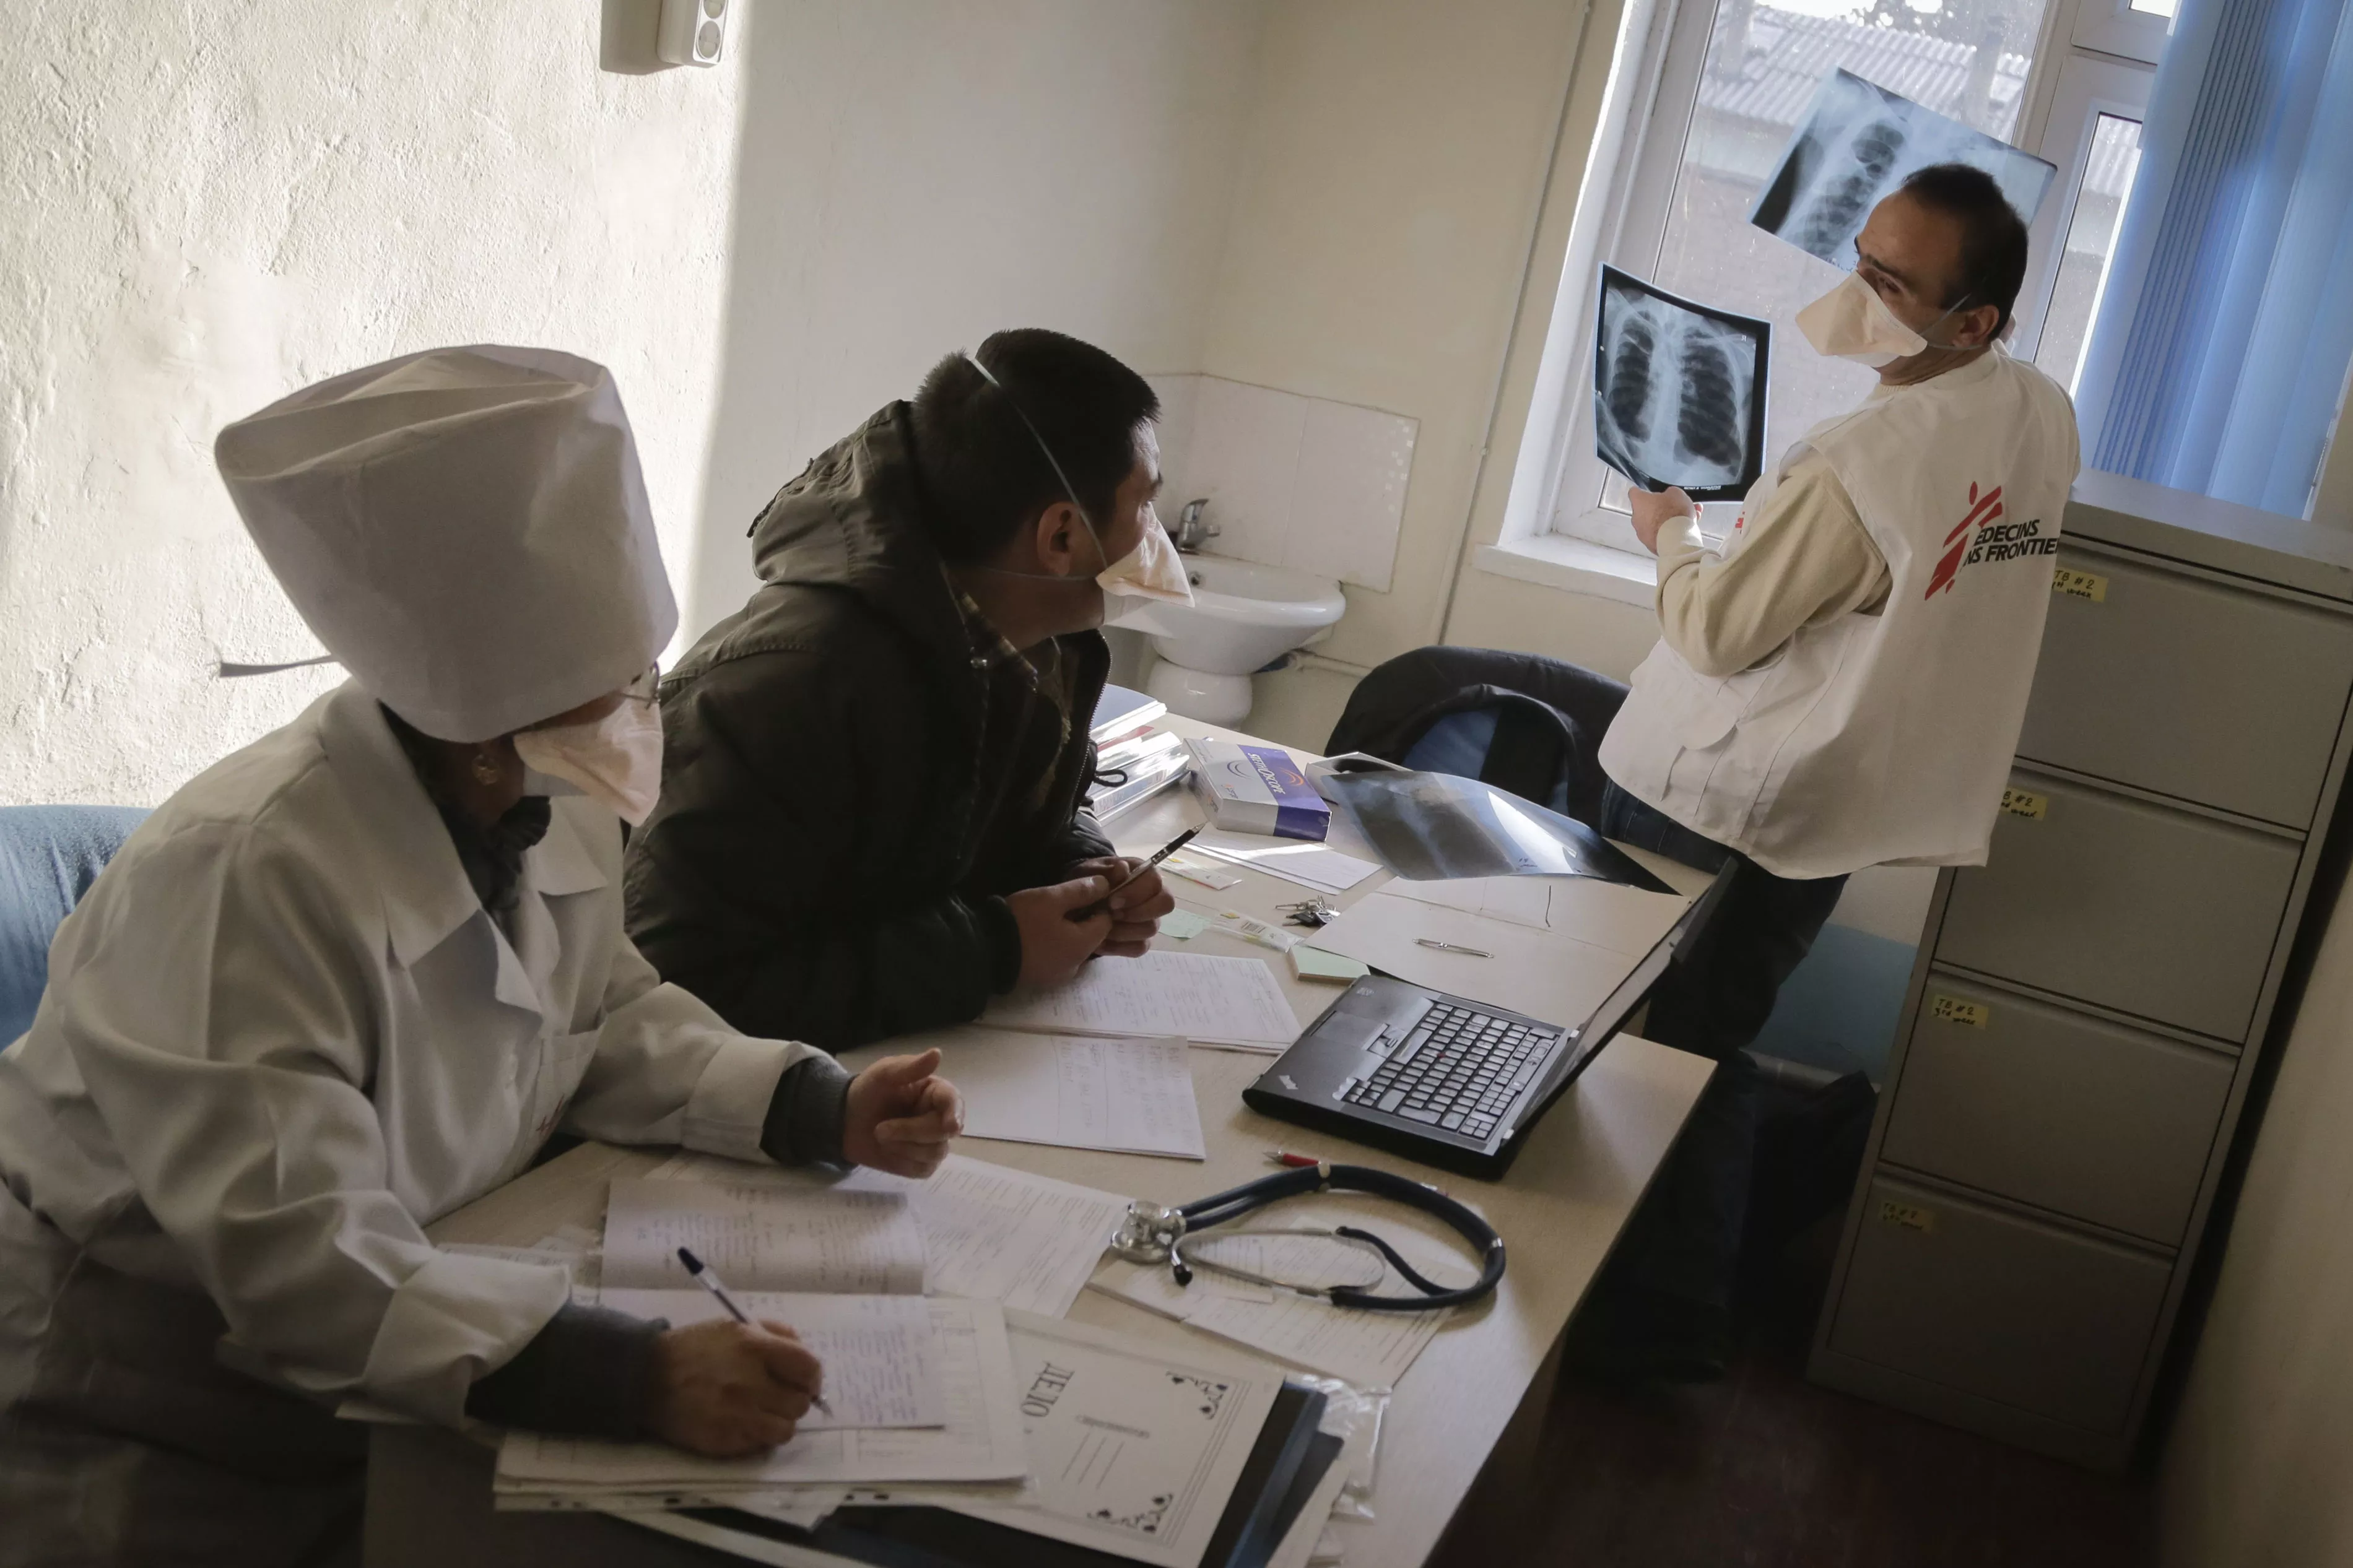 MSF operating in a district of Kyrgyzstan where TB rates are among the highest in the country. January 2015